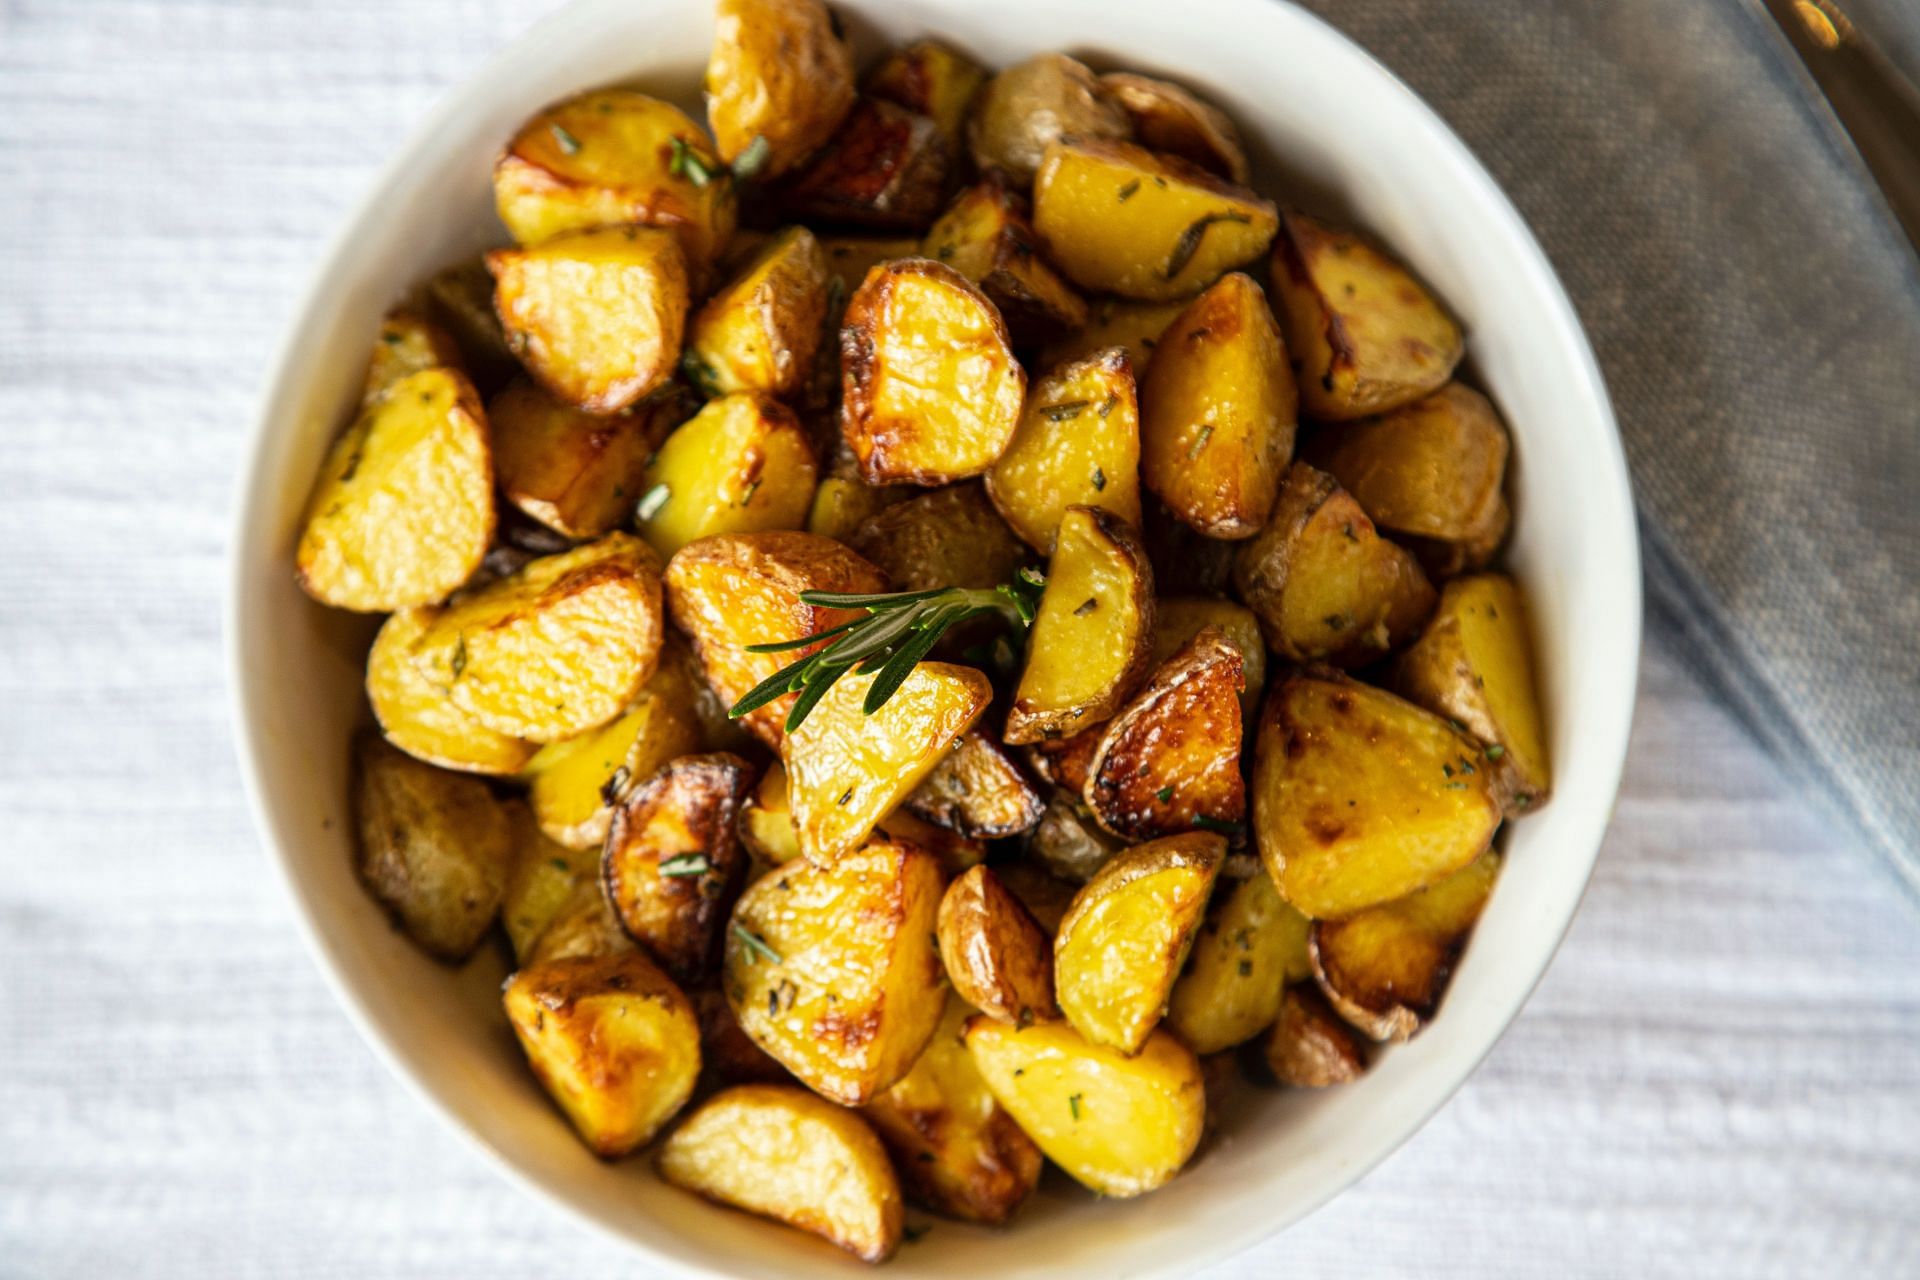 Baked potatoes are healthy and delicious.  (Image via Unsplash / Clark Douglas)